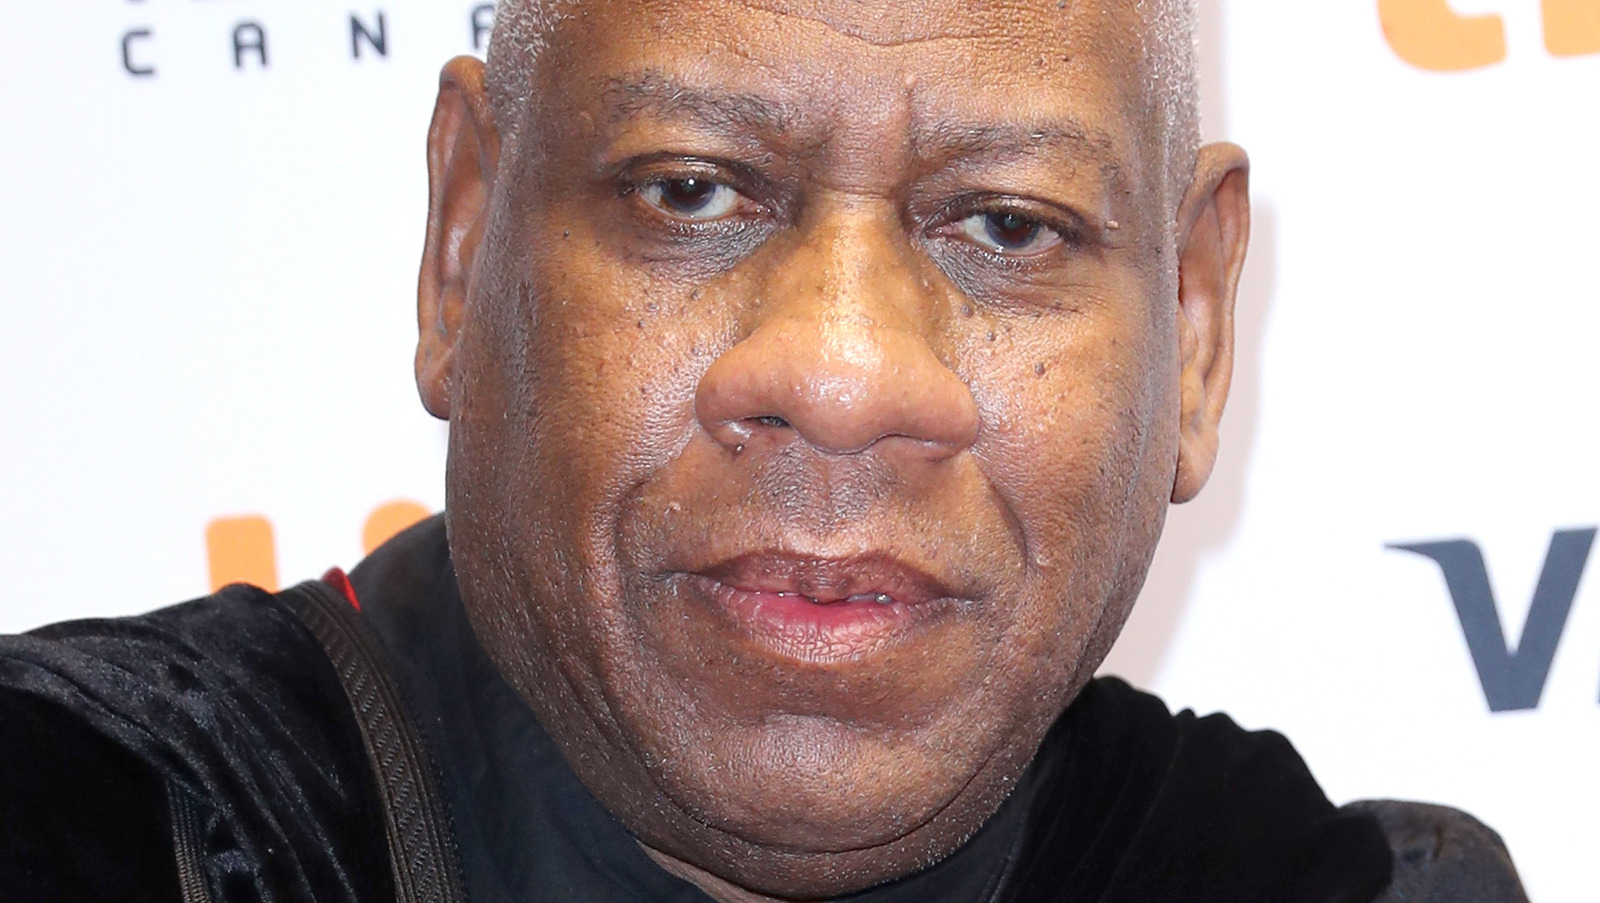 Andre Leon Talley, Vogue's former editor-at-large and fashion icon, has died tragically